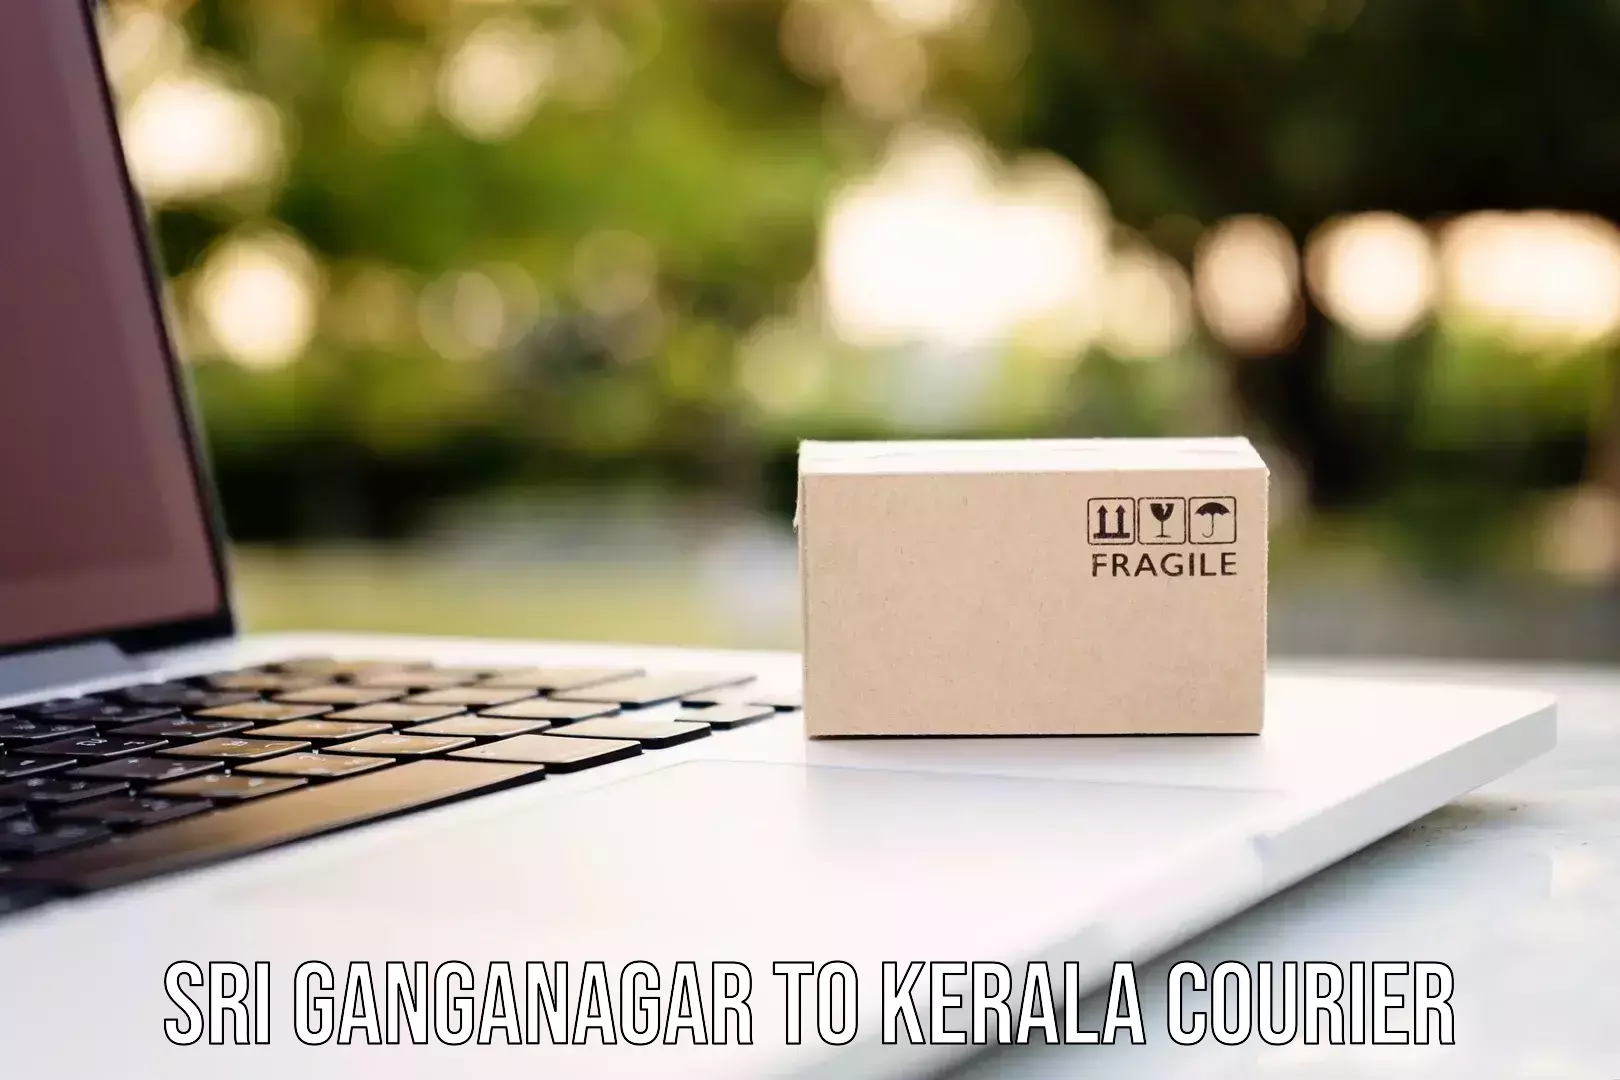 Smart logistics solutions Sri Ganganagar to Cochin University of Science and Technology